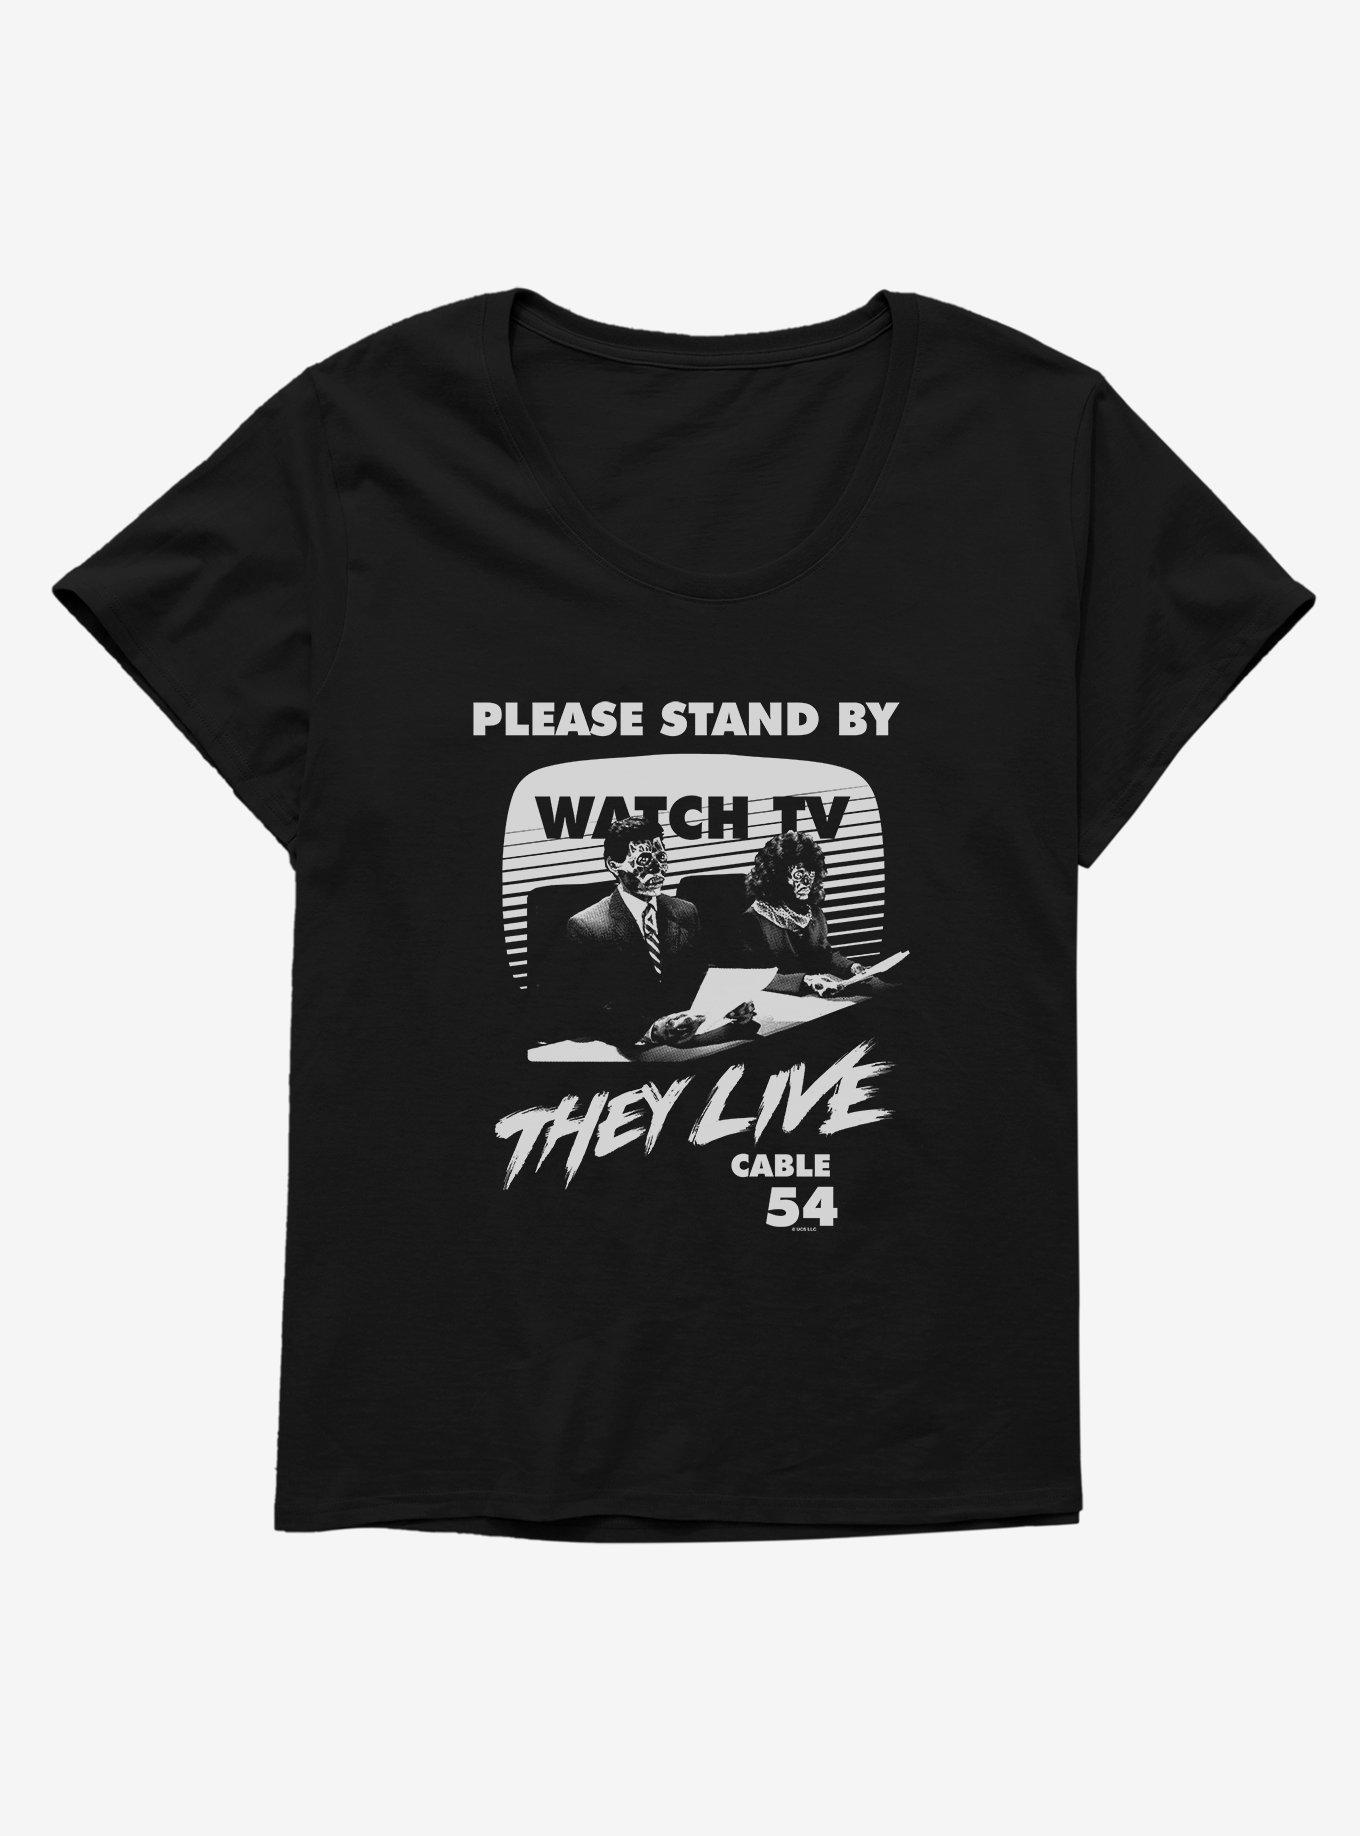 They Live Watch TV Womens T-Shirt Plus Size, BLACK, hi-res